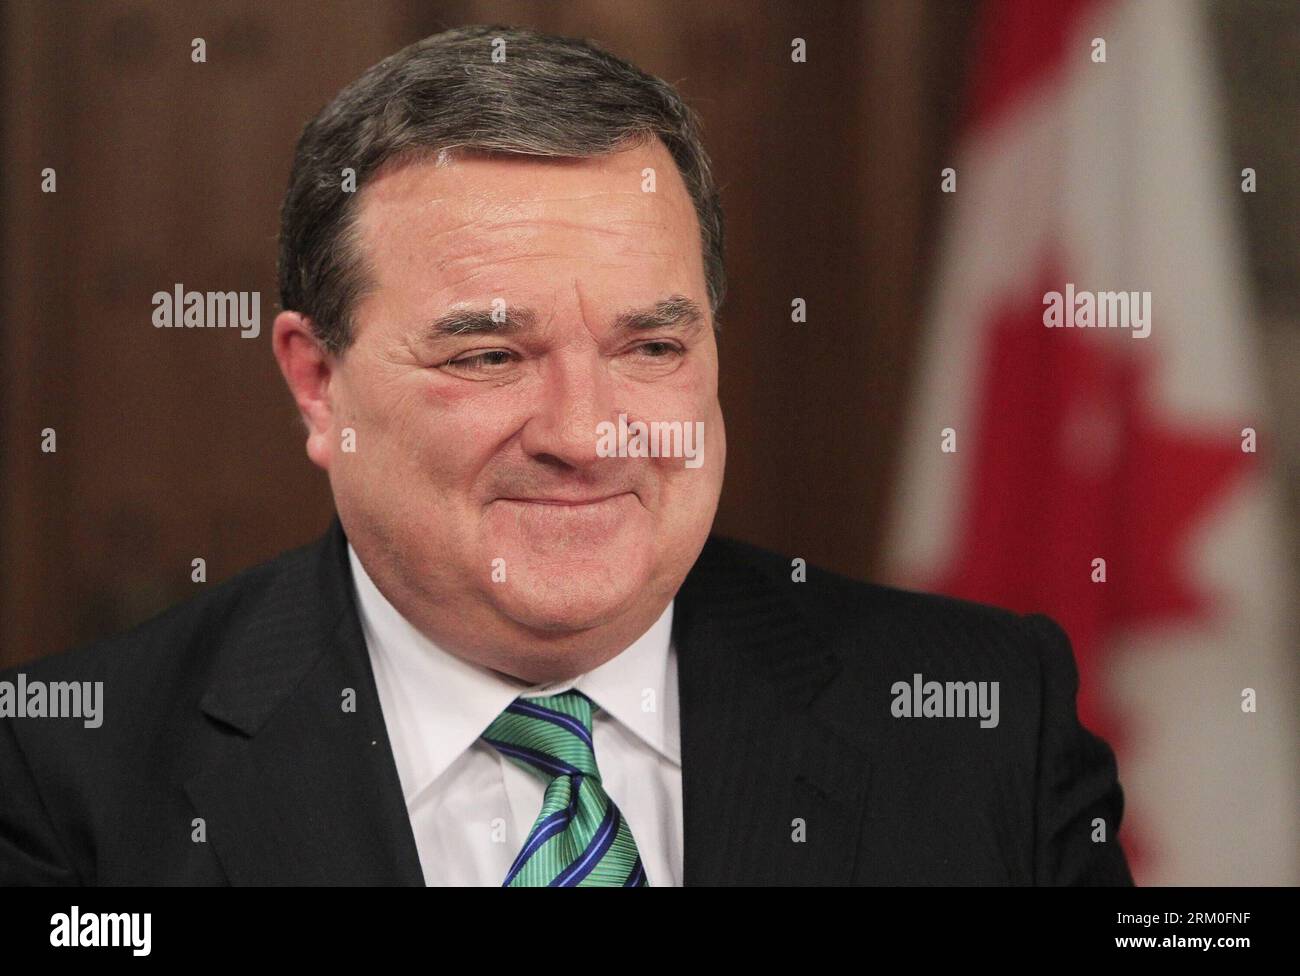 Bildnummer: 59410623  Datum: 21.03.2013  Copyright: imago/Xinhua OTTAWA, March 21, 2013 - Canadian Finance Minister Jim Flaherty is interviewed by media following the tabling of this year s federal budget in the House of Commons on Parliament Hill in Ottawa, Canada on March 21, 2013. In continuing Flaherty s goal to eliminate the deficit by 2015, there will be very little spending and few tax cuts, with a heavy emphasis on skill development to fill vacant jobs with qualified workers. (Xinhua/Cole Burston)(axy) CANADA-OTTAWA-BUDGET PUBLICATIONxNOTxINxCHN People xns x0x 2013 quer premiumd     59 Stock Photo